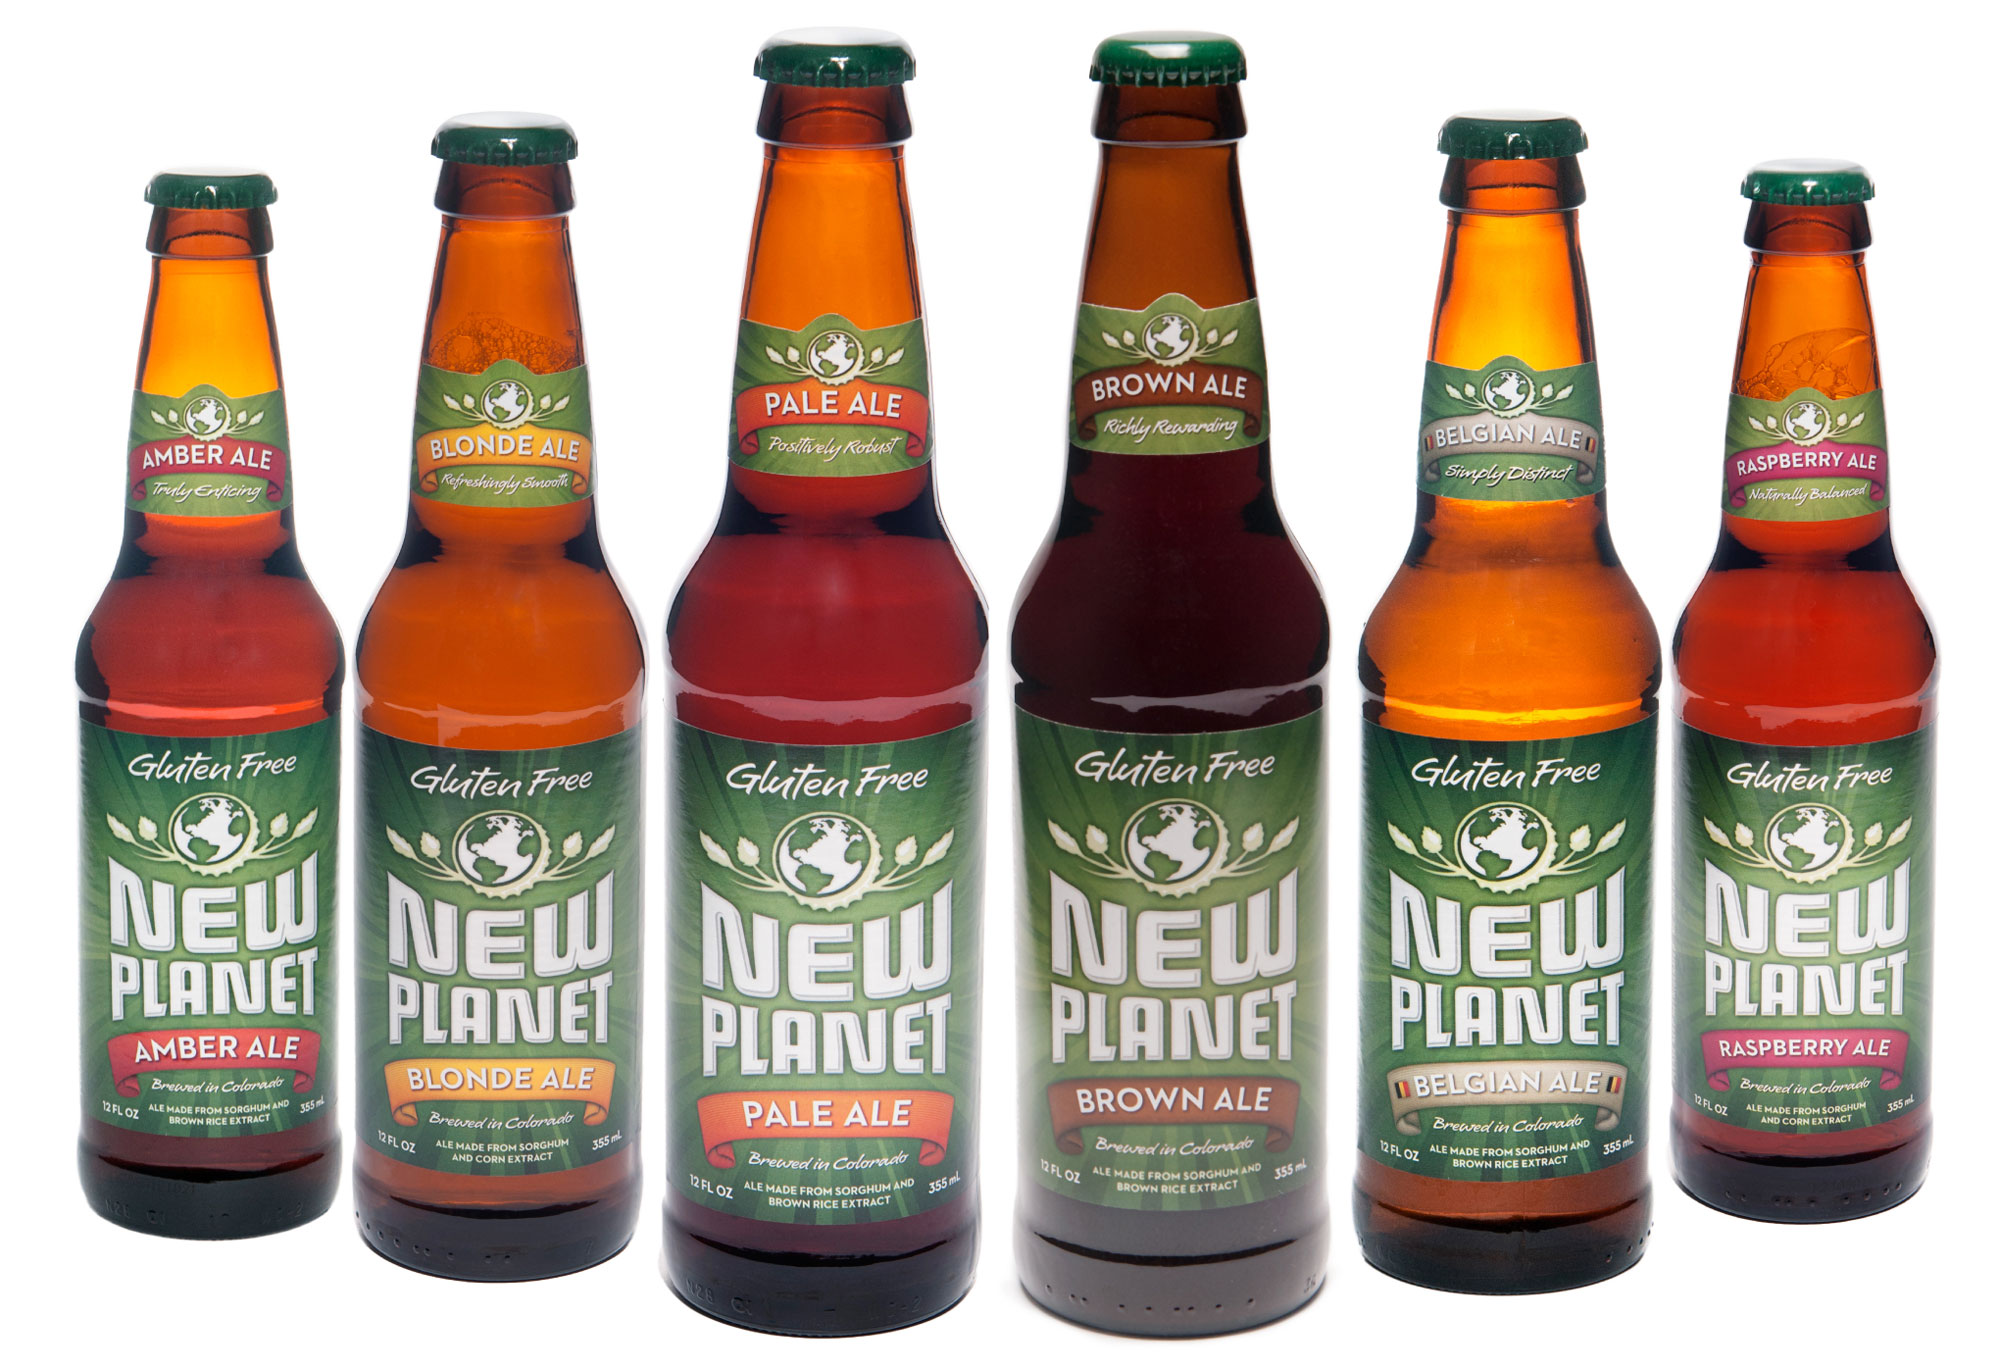 Photograph of six bottles of New Planet brand beer. The beers all have labels that say "gluten free" at the top. 